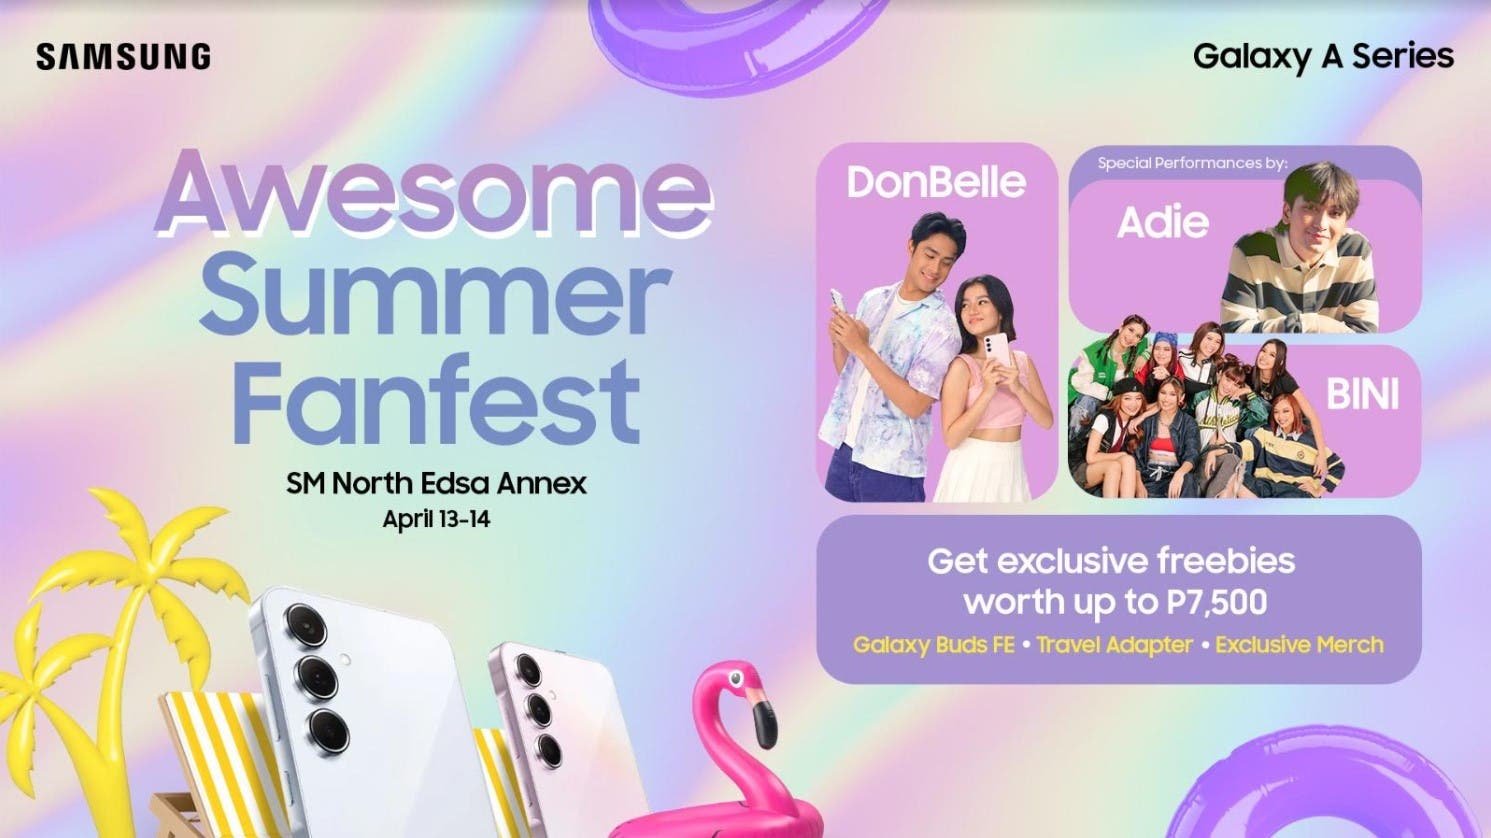 DonBelle, BINI, and Adie Headline Samsung’s ‘Awesome Summer Fanfest’